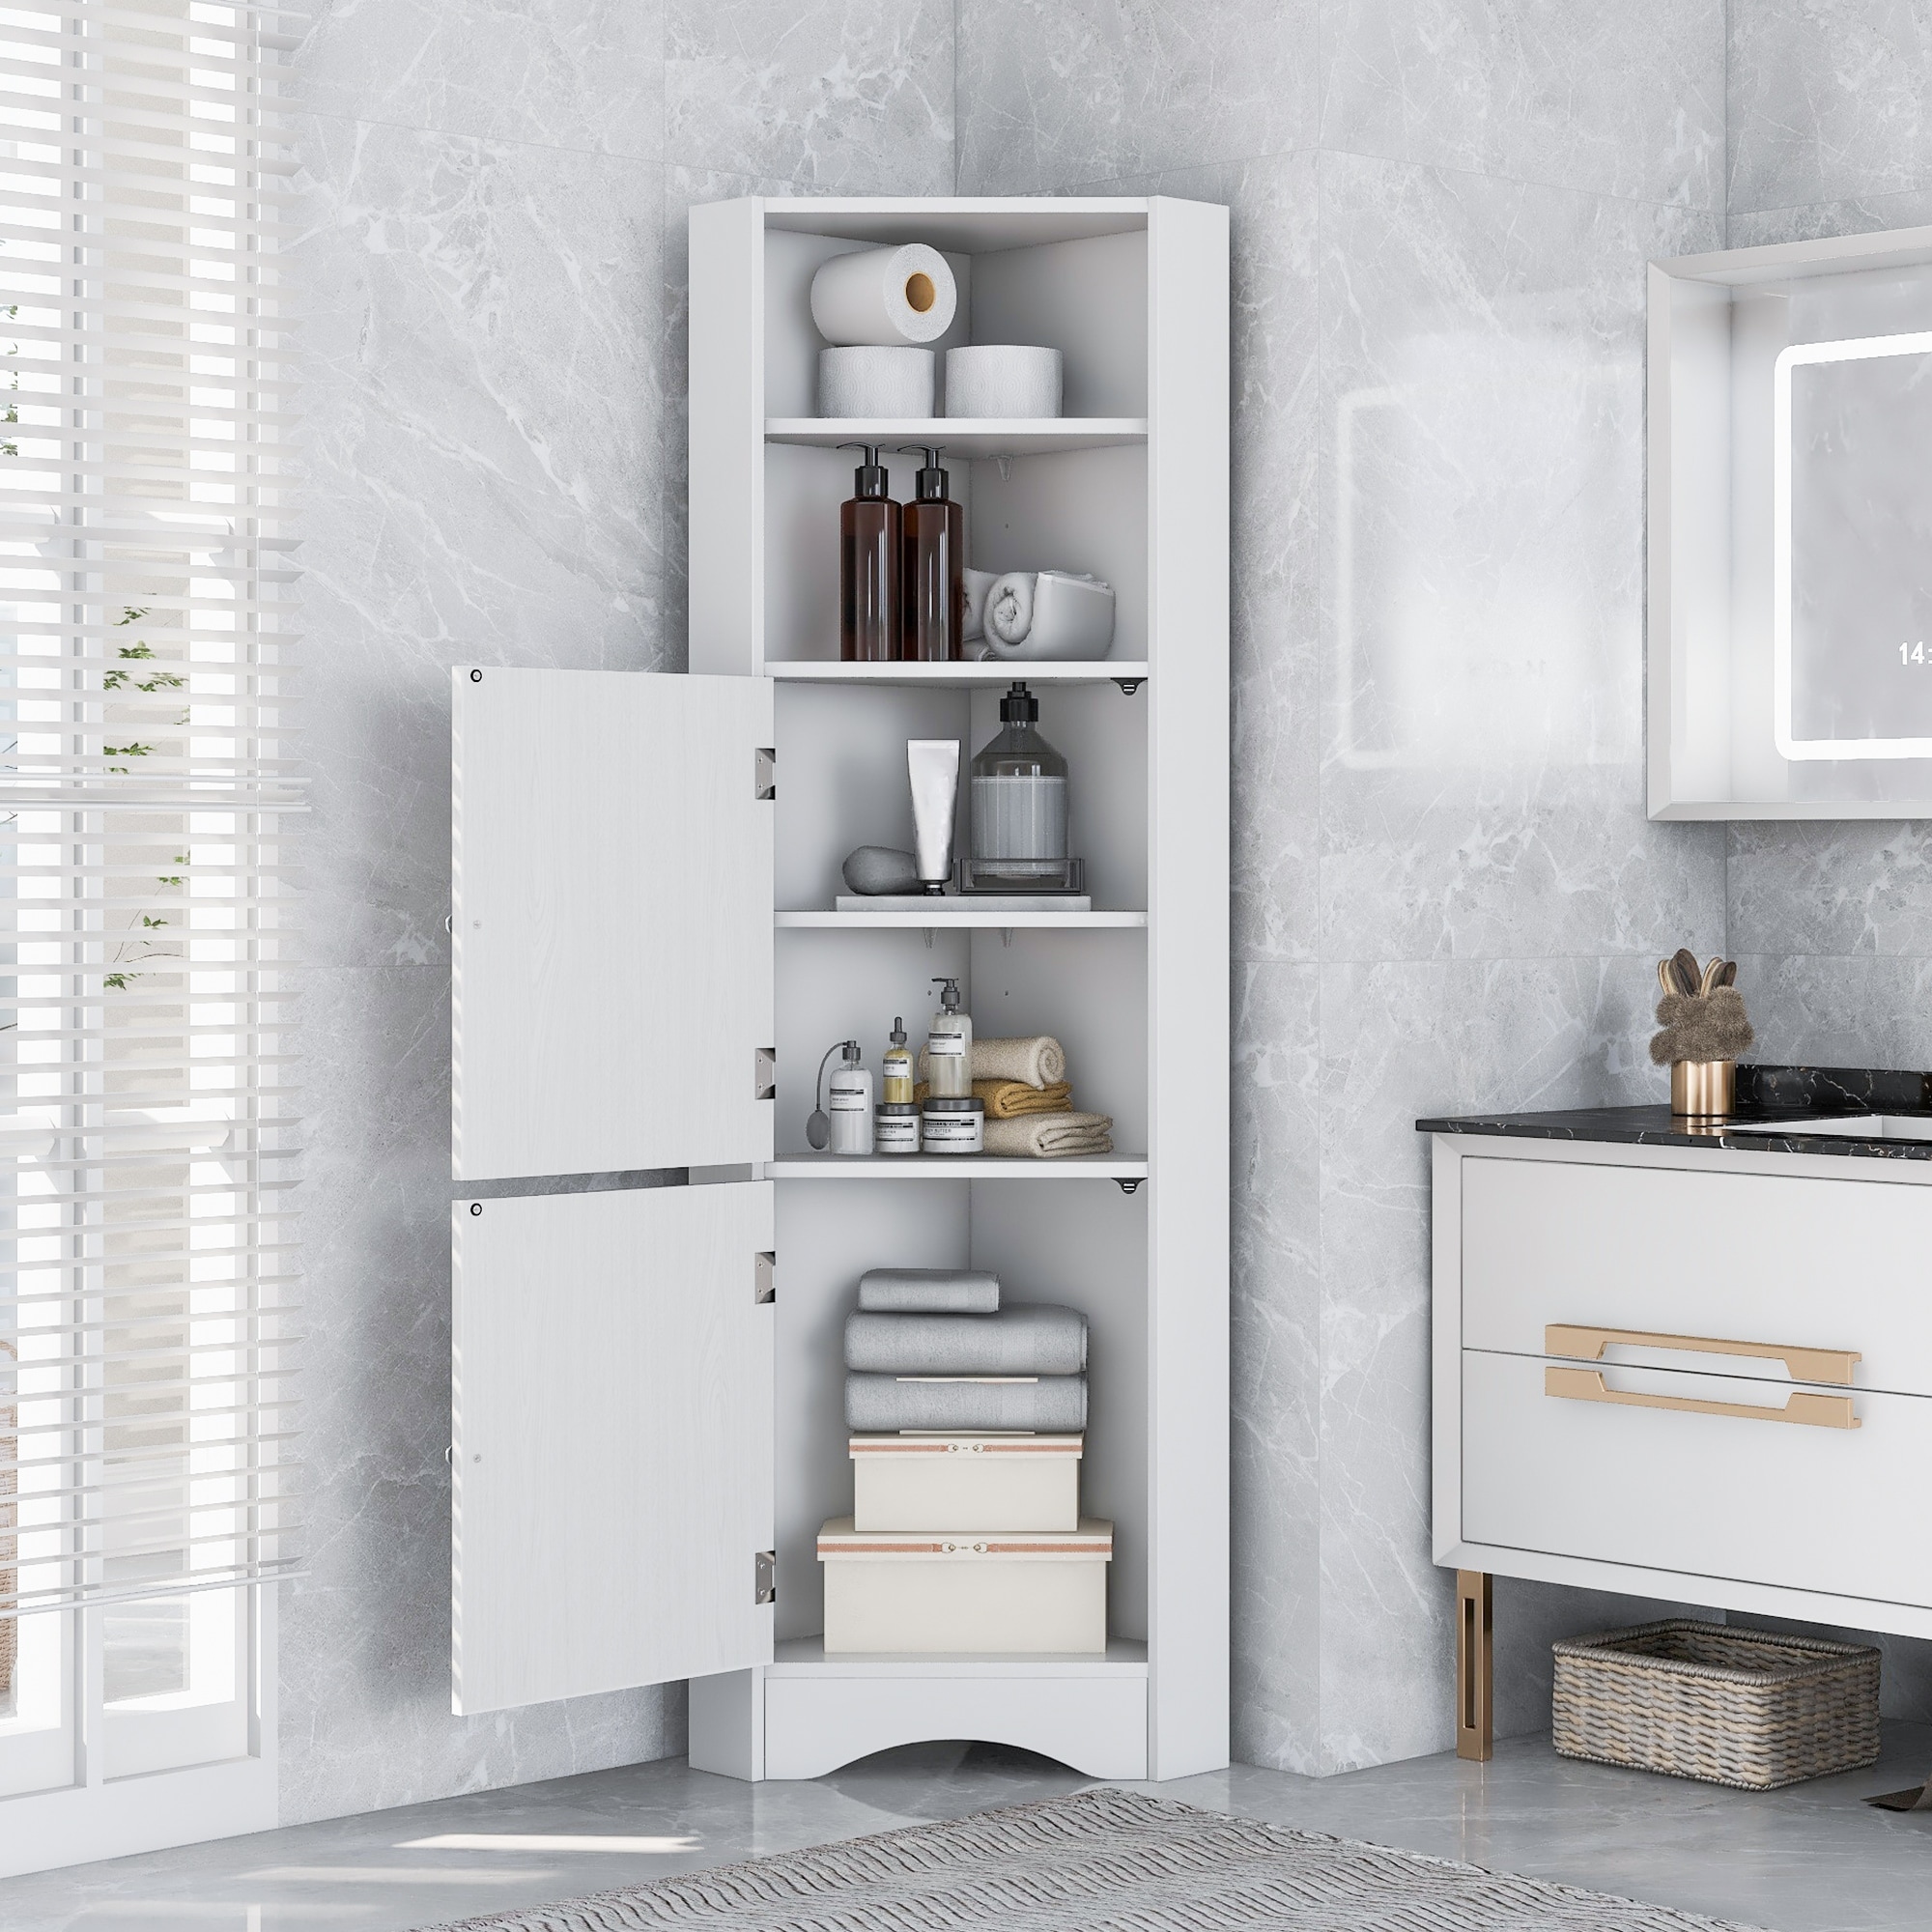 https://ak1.ostkcdn.com/images/products/is/images/direct/38c24092da183dd77ffe55ec9b9abc32a3a74270/Nestfair-Tall-Freestanding-Bathroom-Cabinet-Corner-Storage-Cabinet-with-Doors-and-Adjustable-Shelves.jpg